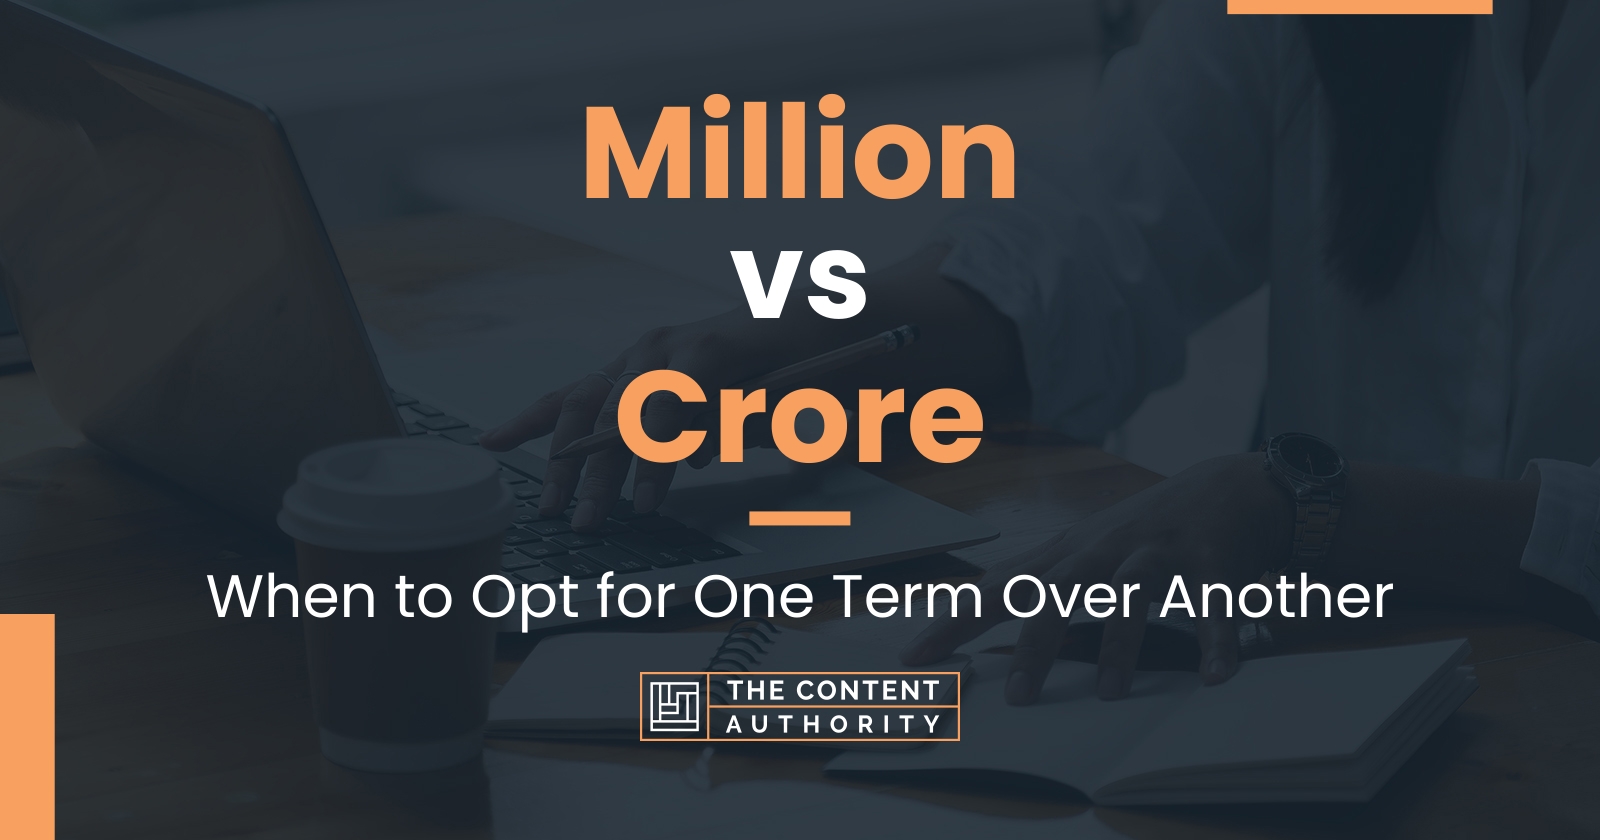 Million vs Crore: When to Opt for One Term Over Another